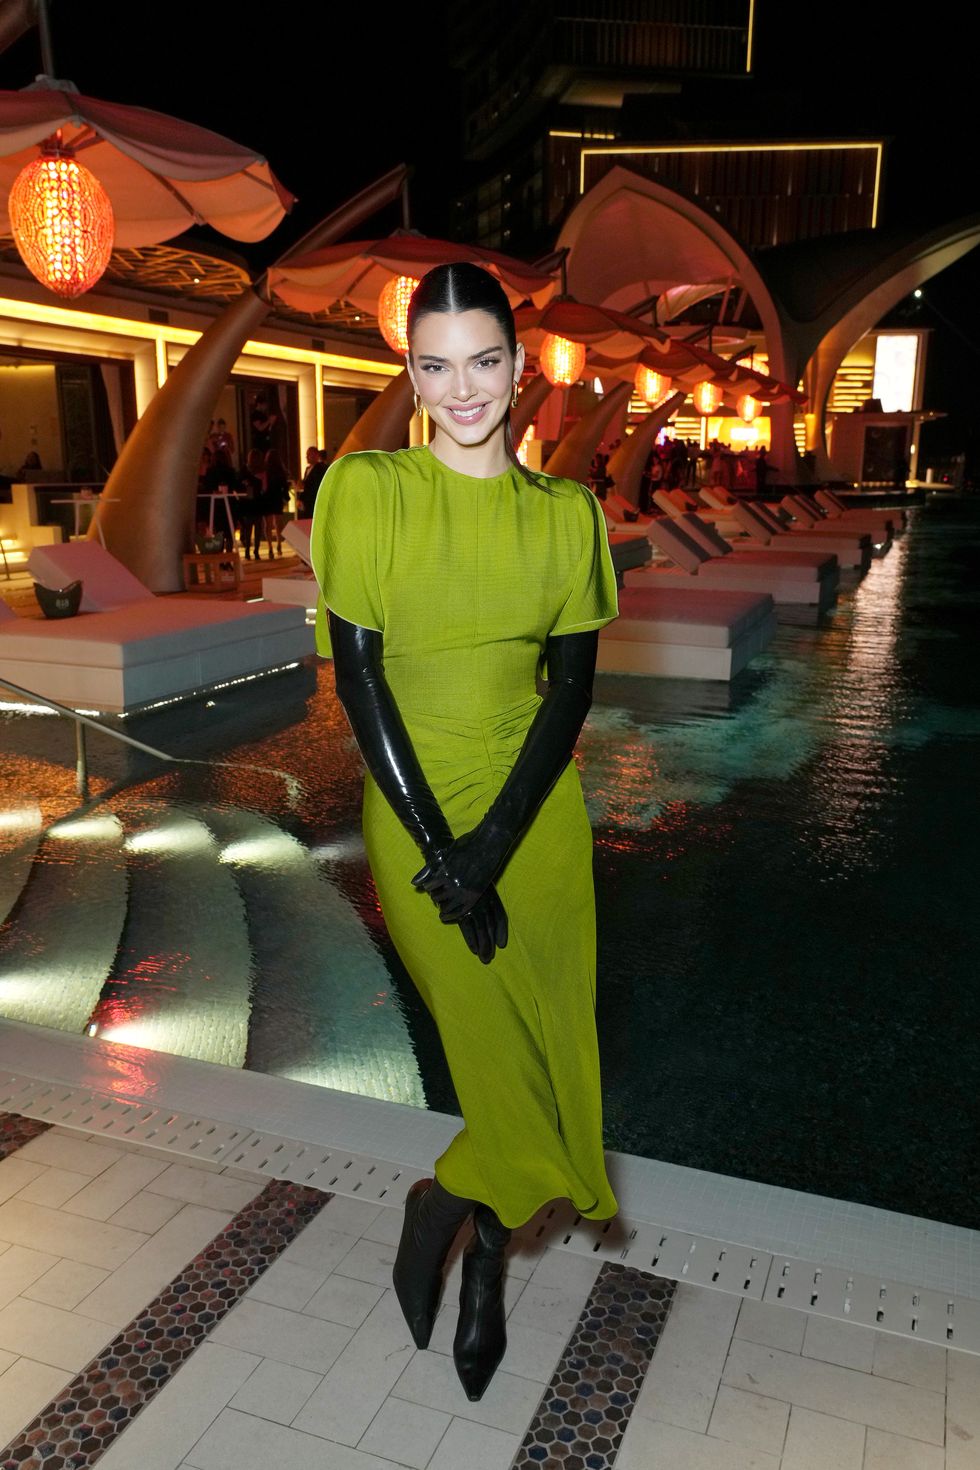 dubai, united arab emirates january 20 kendall jenner hosts the launch of 818 tequila in the uae with an after party at cloud22 during the grand reveal weekend for atlantis the royal, dubais new ultra luxury hotel on january 20, 2023 in dubai, united arab emirates photo by kevin mazurgetty images for atlantis the royal